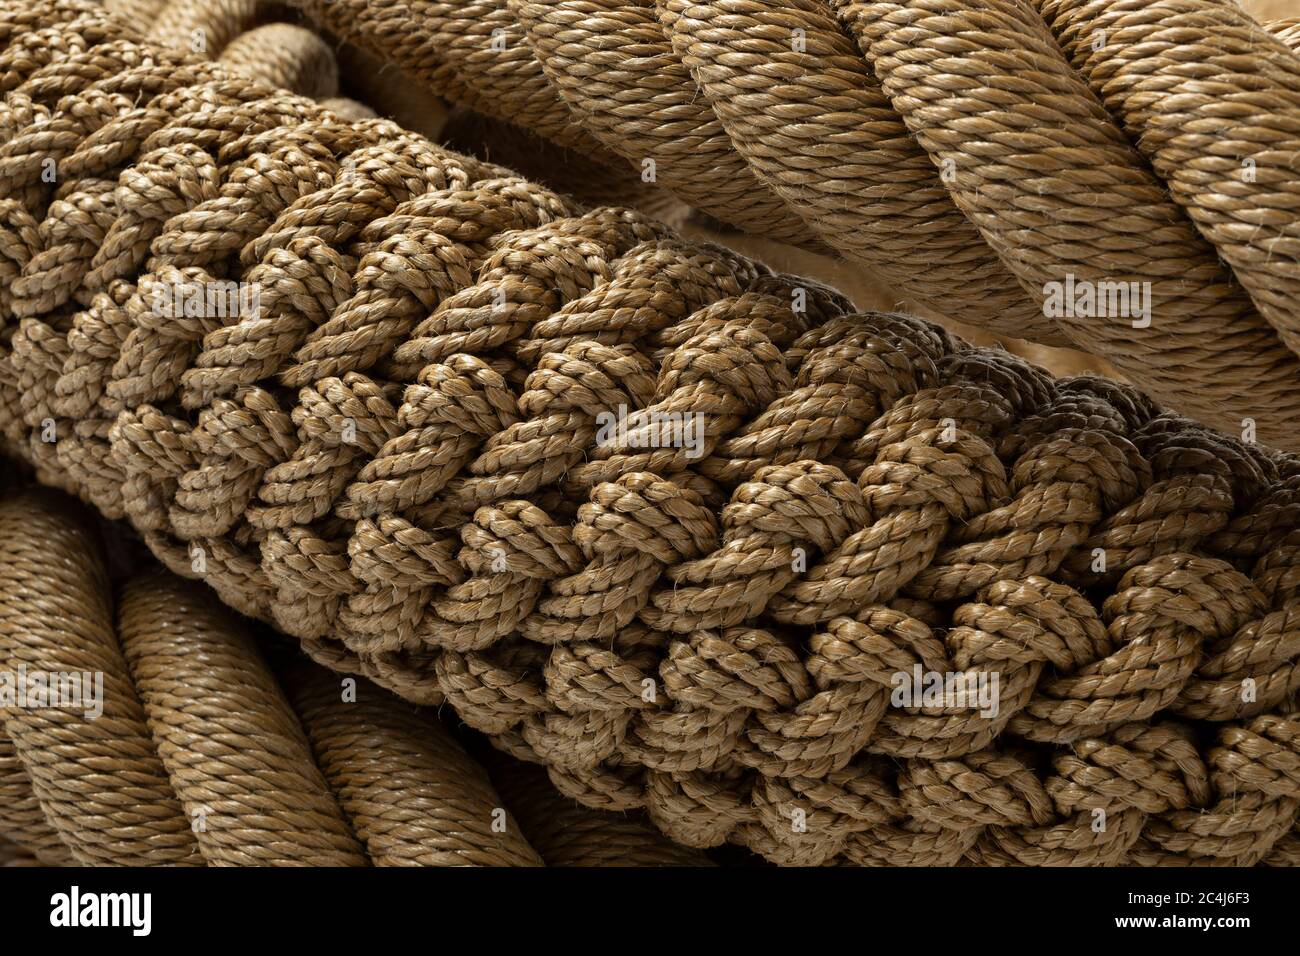 New handmade knotted rope close up full frame with different knots Stock Photo